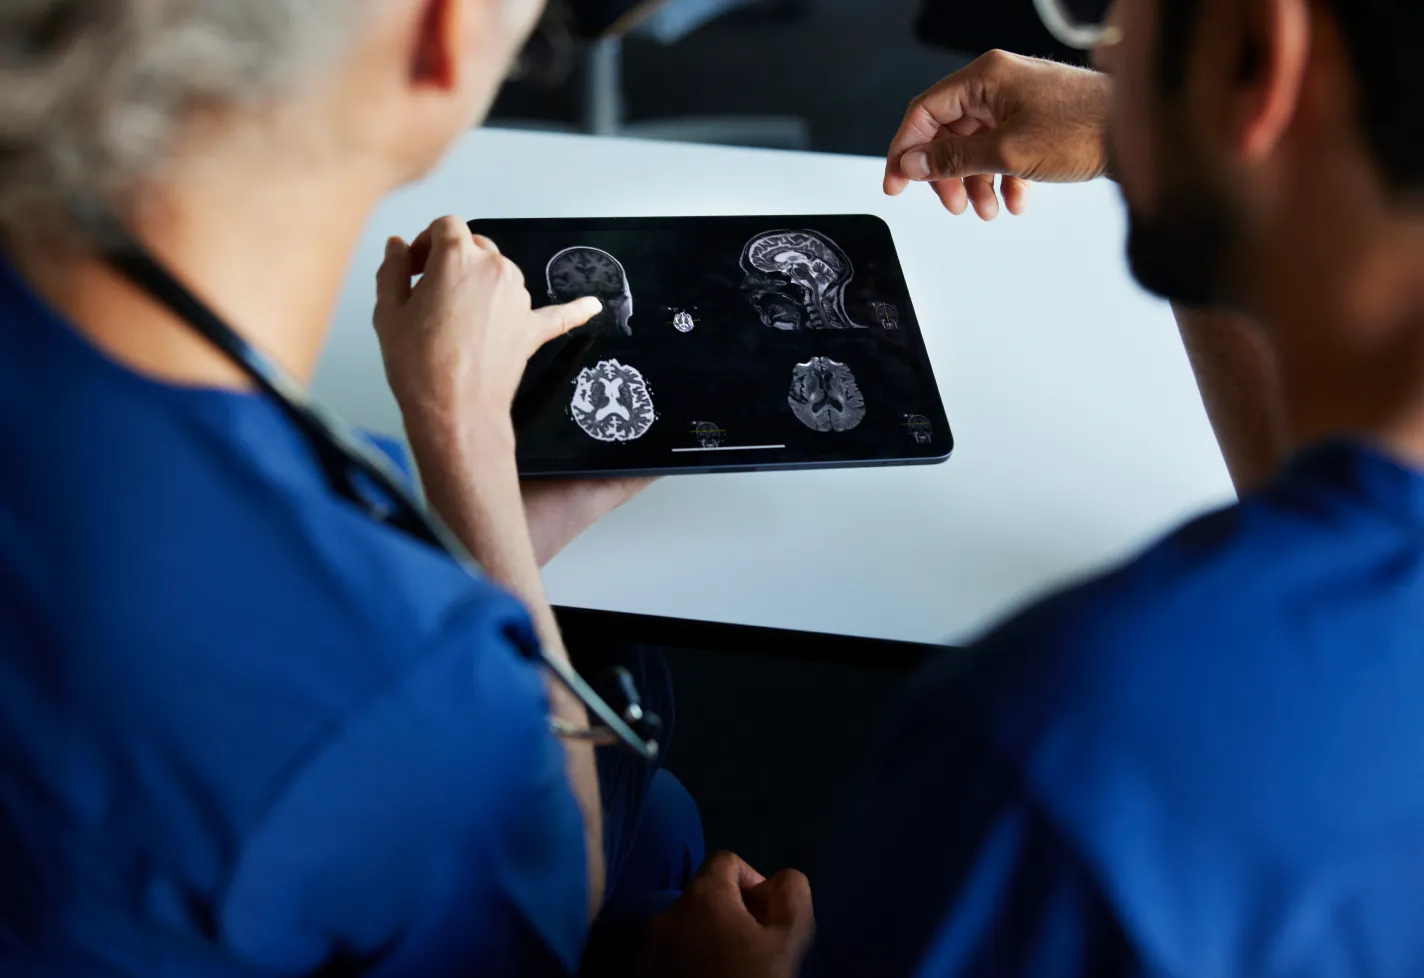 2 medical imaging specialists review a brain scan together